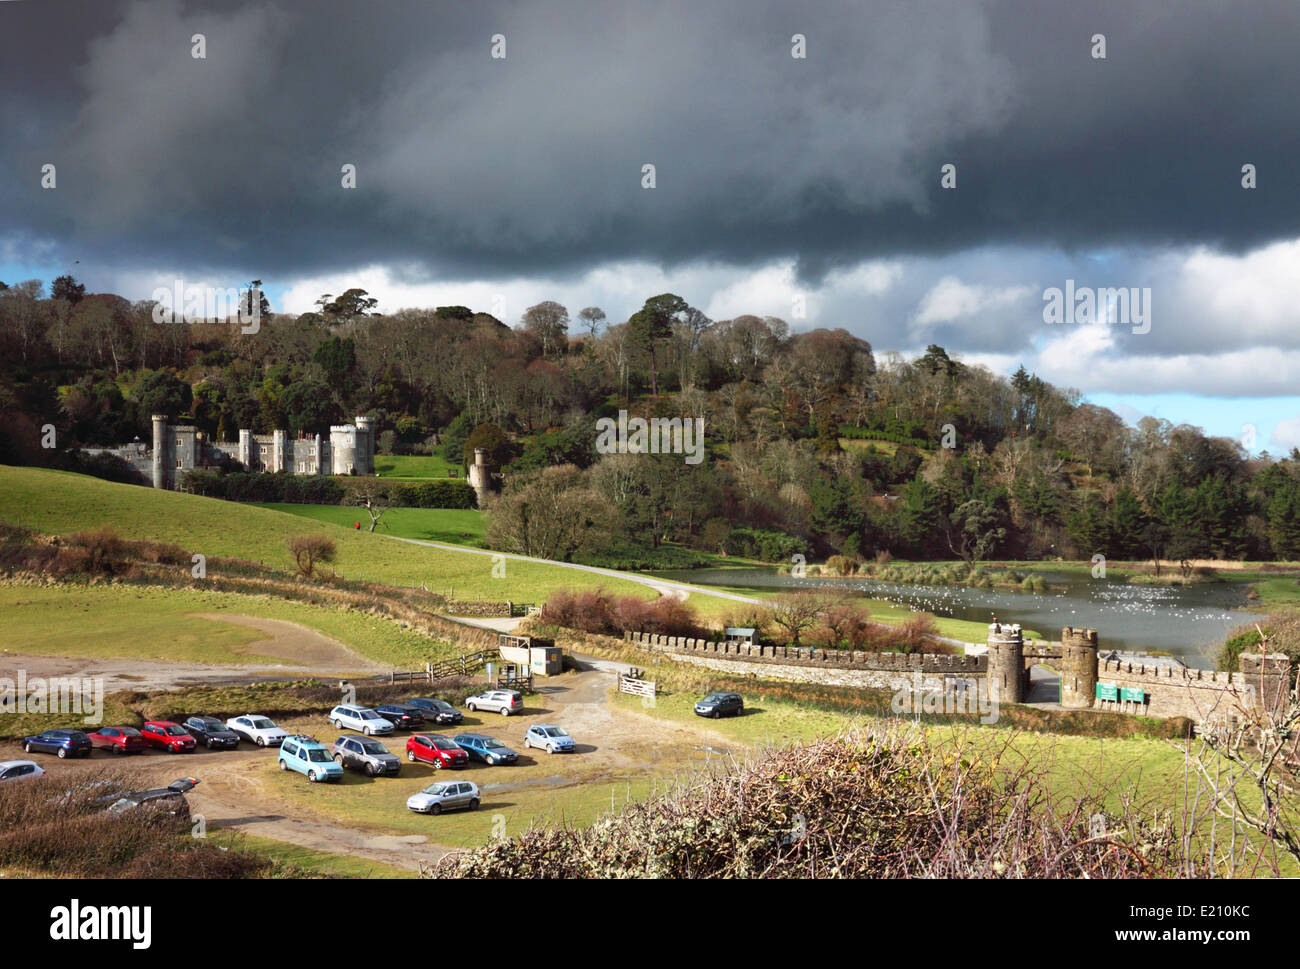 A turretted castle with a car park under dark skies. Stock Photo